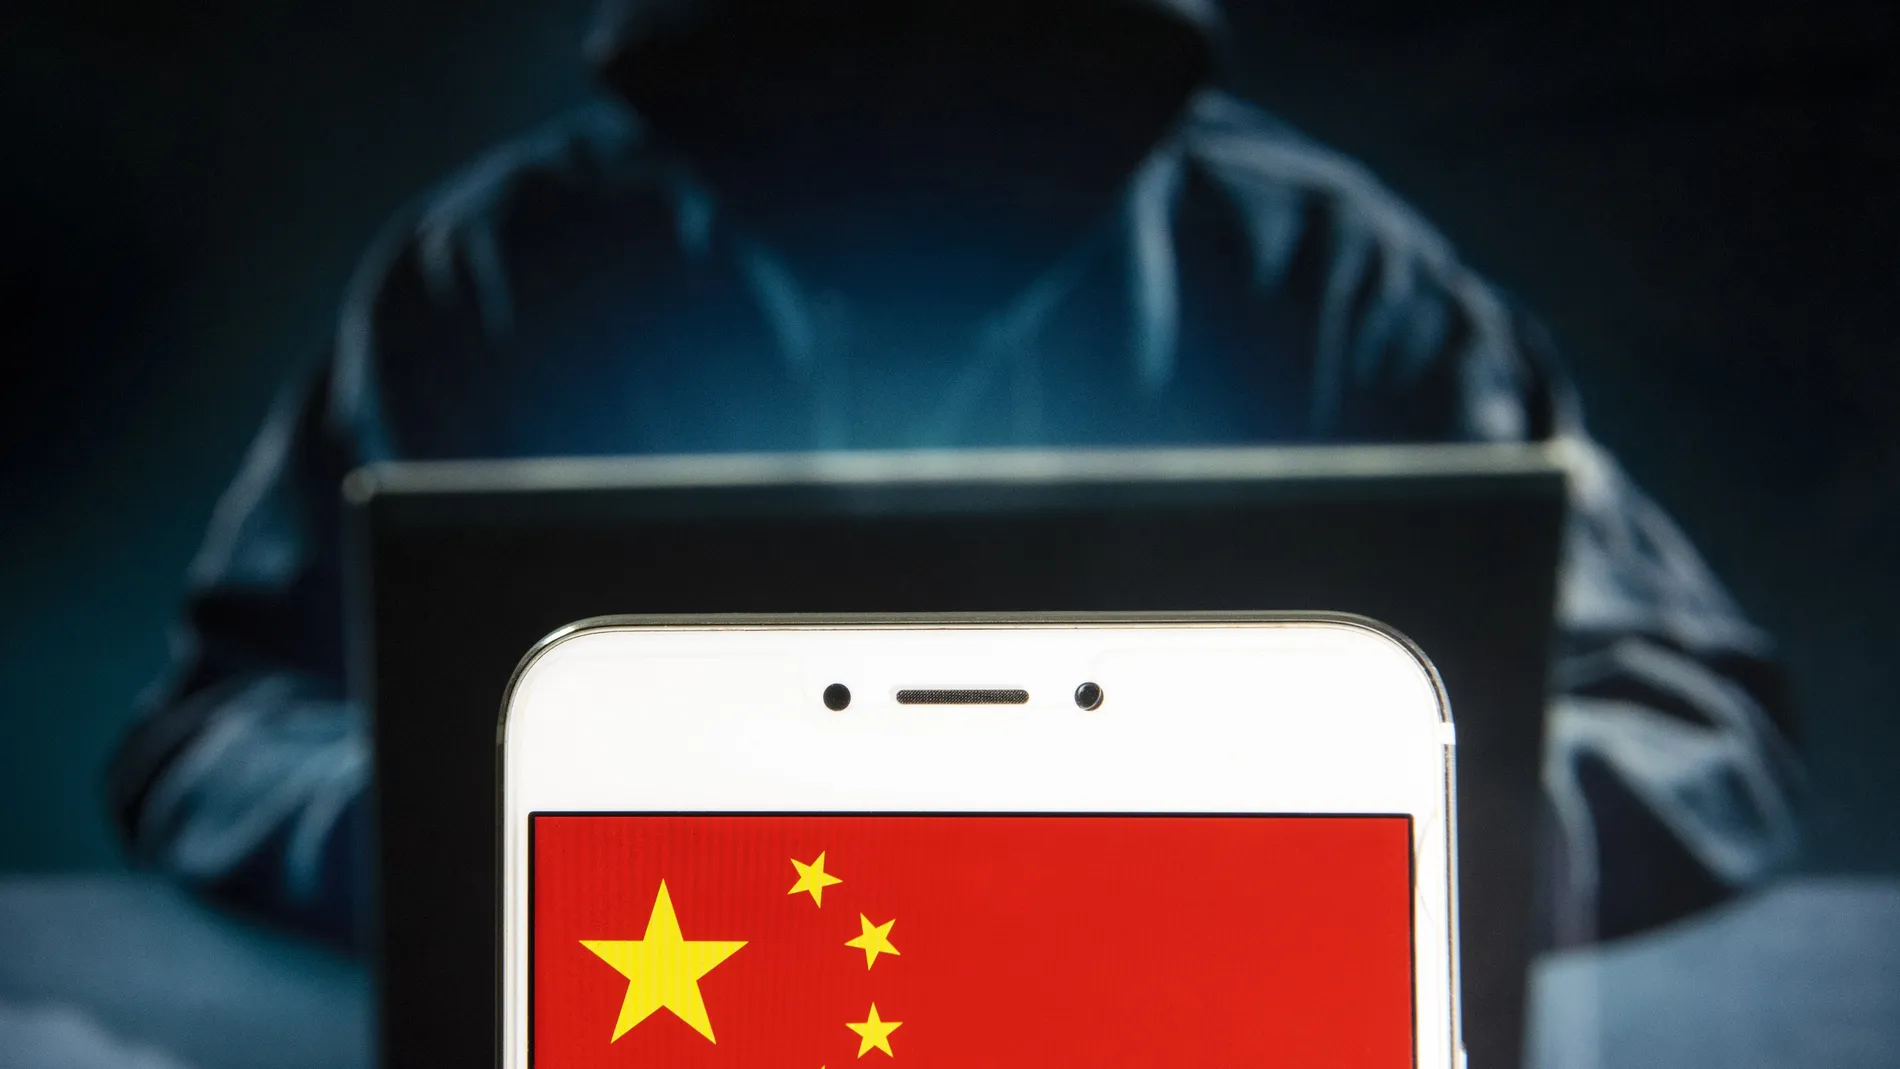 April 5, 2019 - Hong Kong - In this photo illustration a People's Republic of China flag is seen on an Android mobile device with a figure of hacker in the background. (Foto de ARCHIVO) 05/04/2019